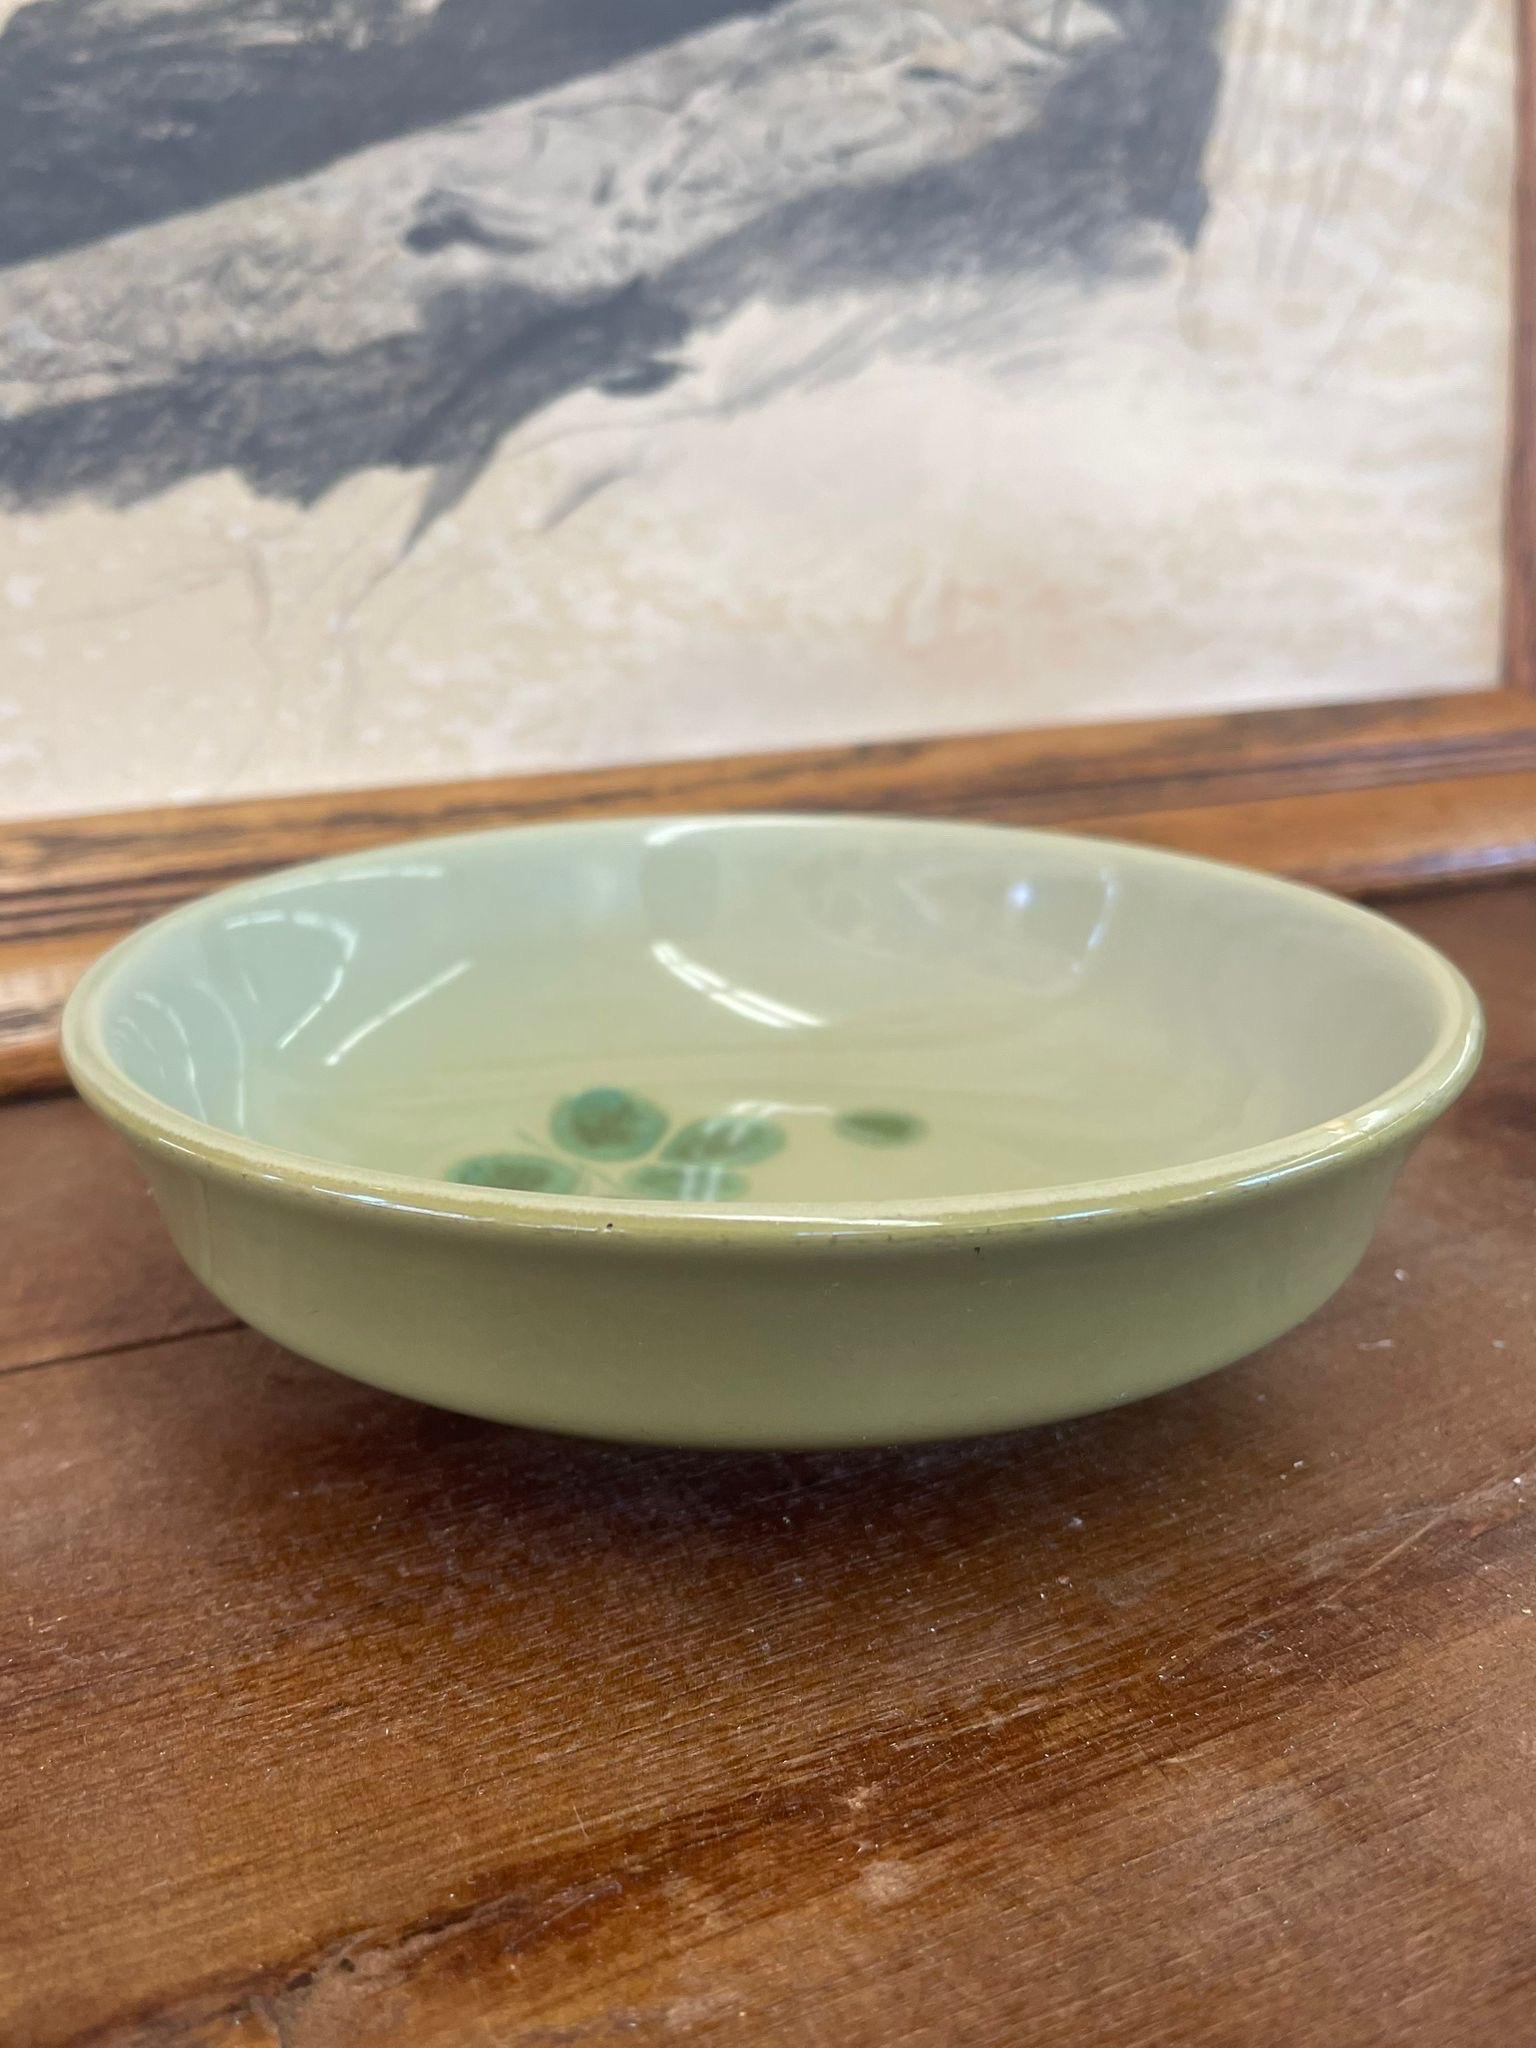 Green Bowl with Floral Motif Inside. Makers Mark on the Bottom. “ Franciscan tEarthenware” as Pictured.
Vintage Condition Consistent With Age as pictured.
Dimensions. 7 Diameter ; 2 H